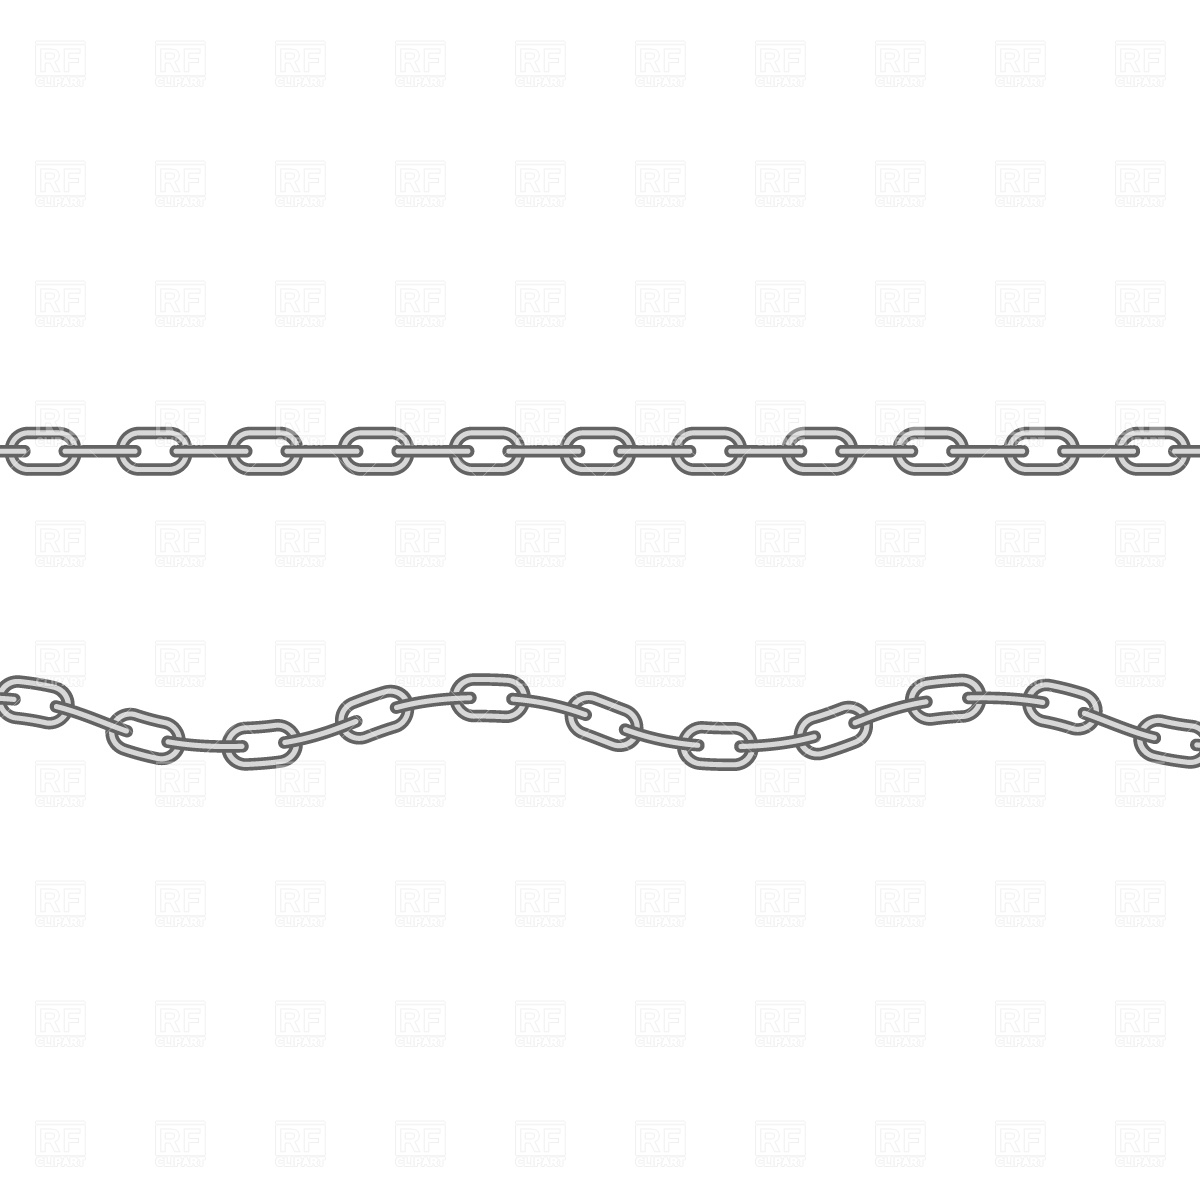 Chain Undulating Border 737 Borders And Frames Download Royalty